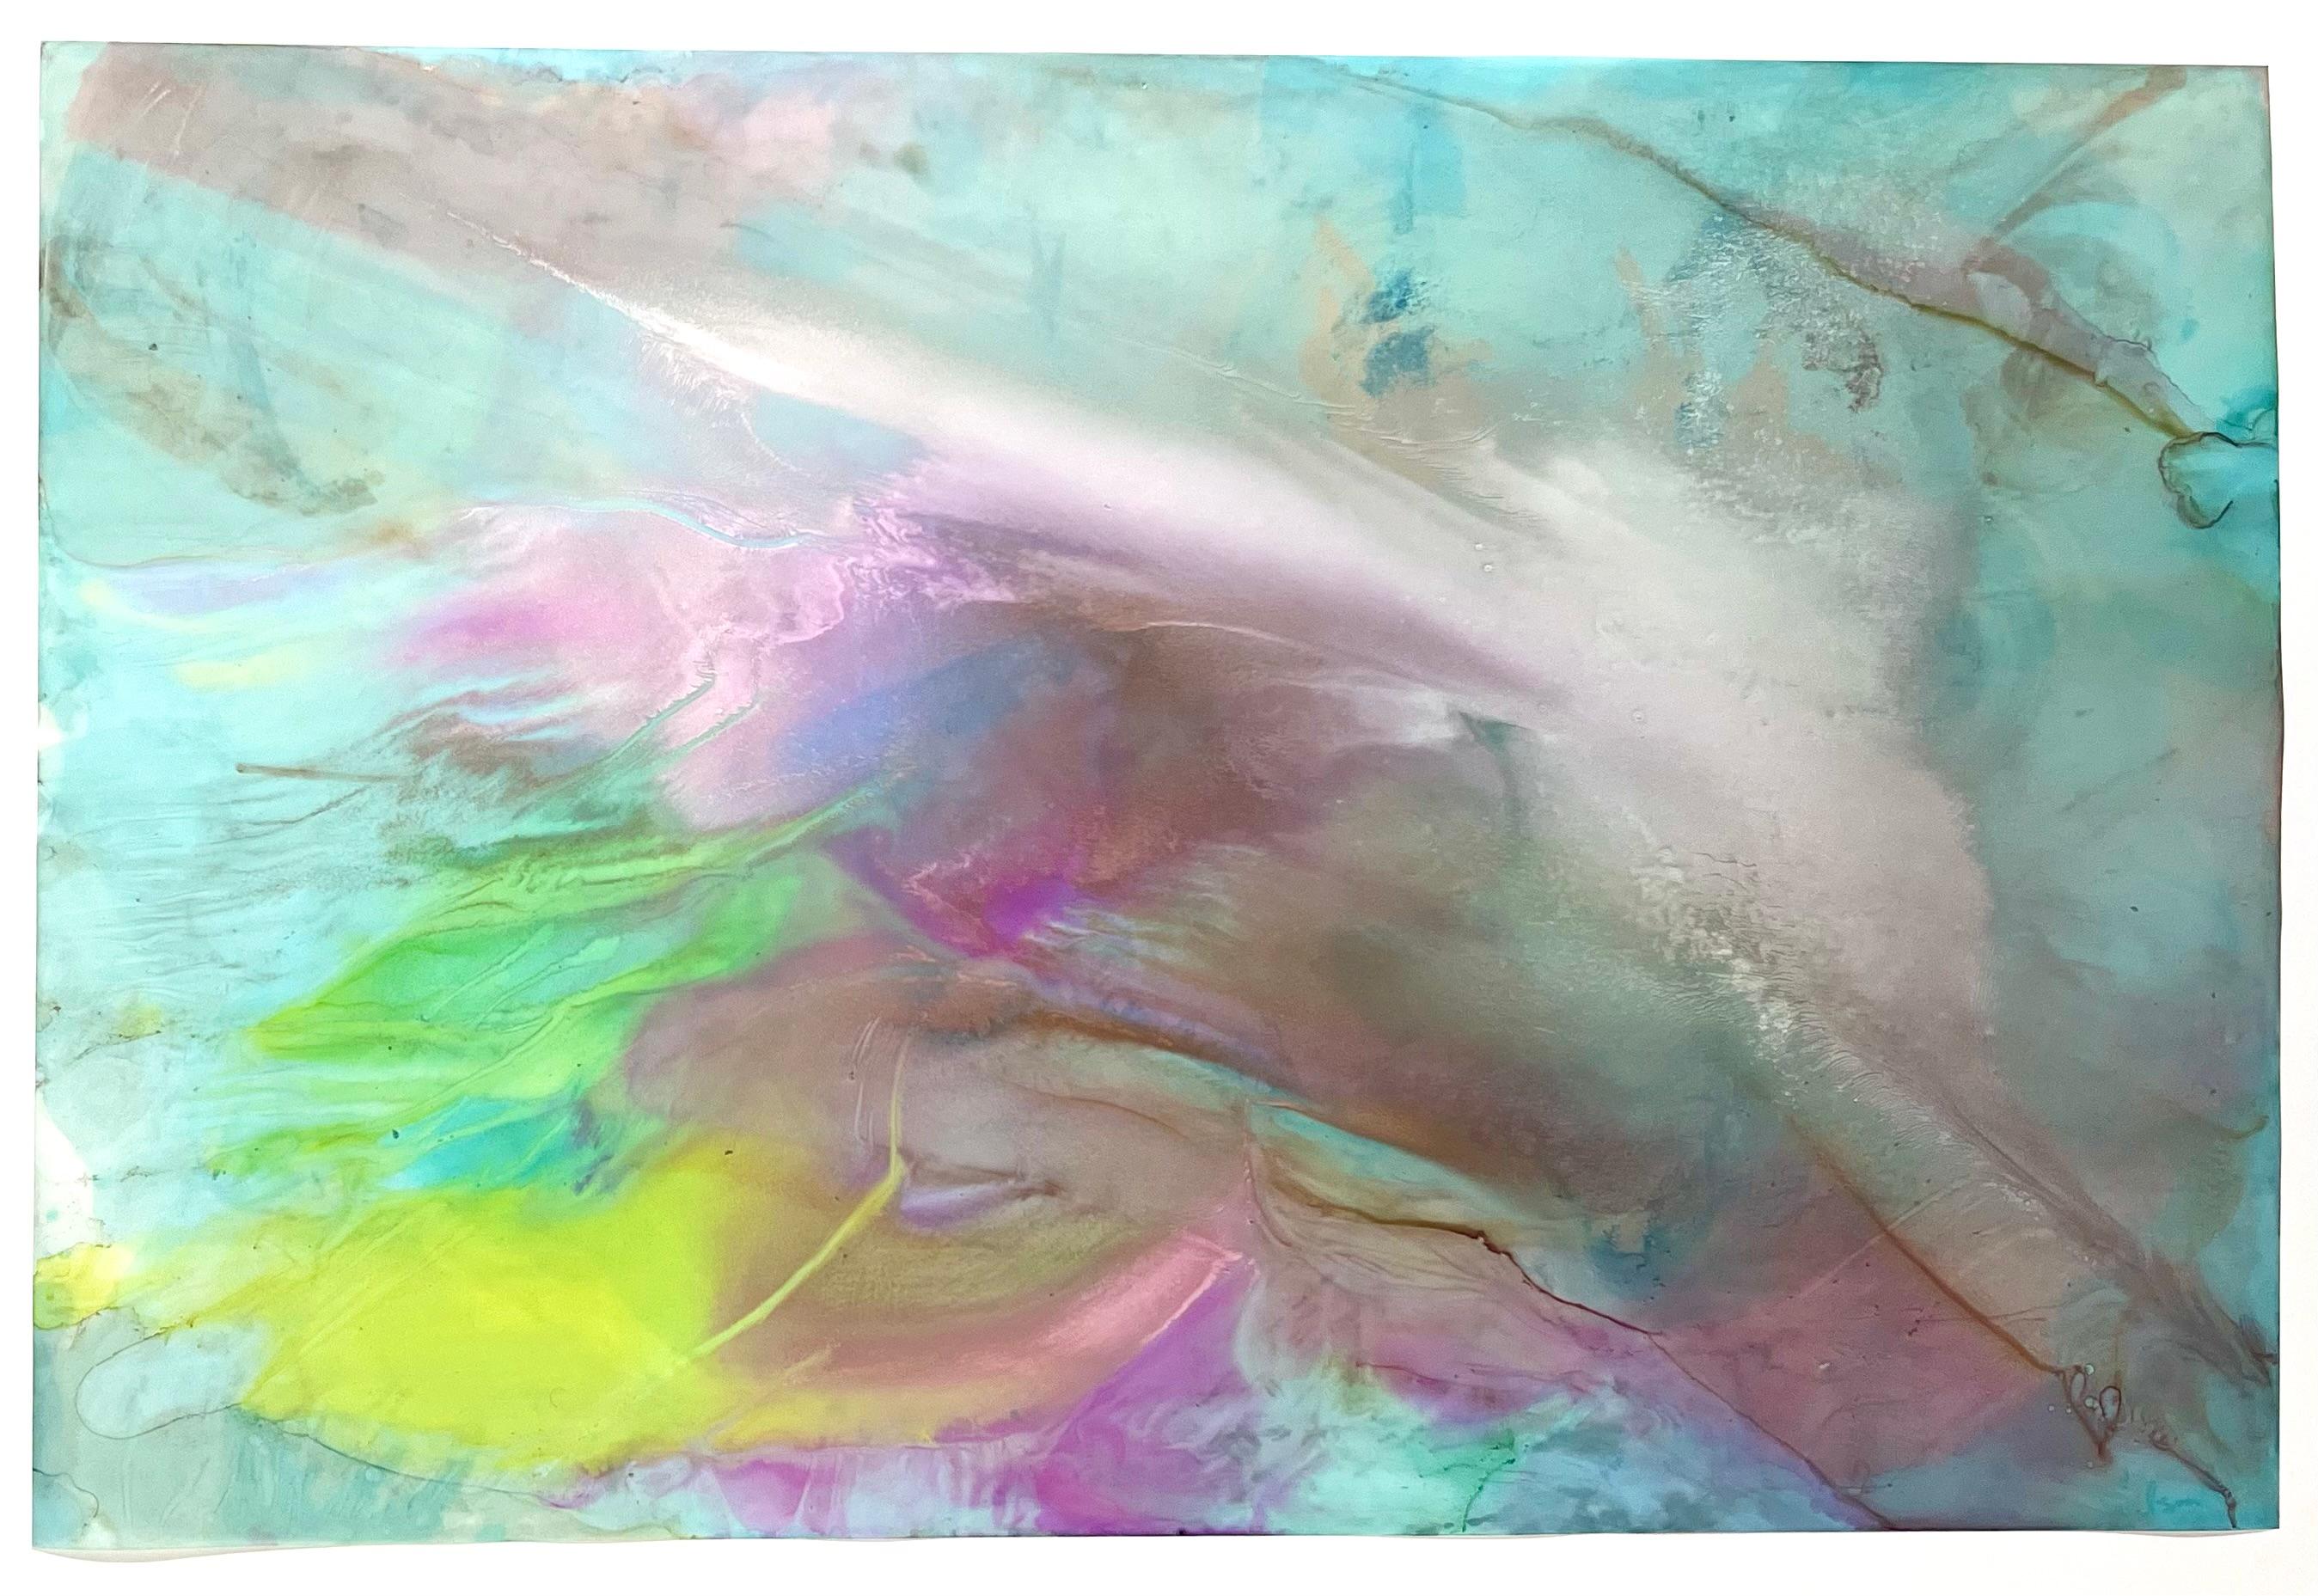 <p>Artist Comments<br>Soft shades of teal, white, and metallic bronze blend with hints of warm browns. The alcohol ink moves energetically across the surface, creating subtle pops of color. The artwork represents the idea of surpassing the